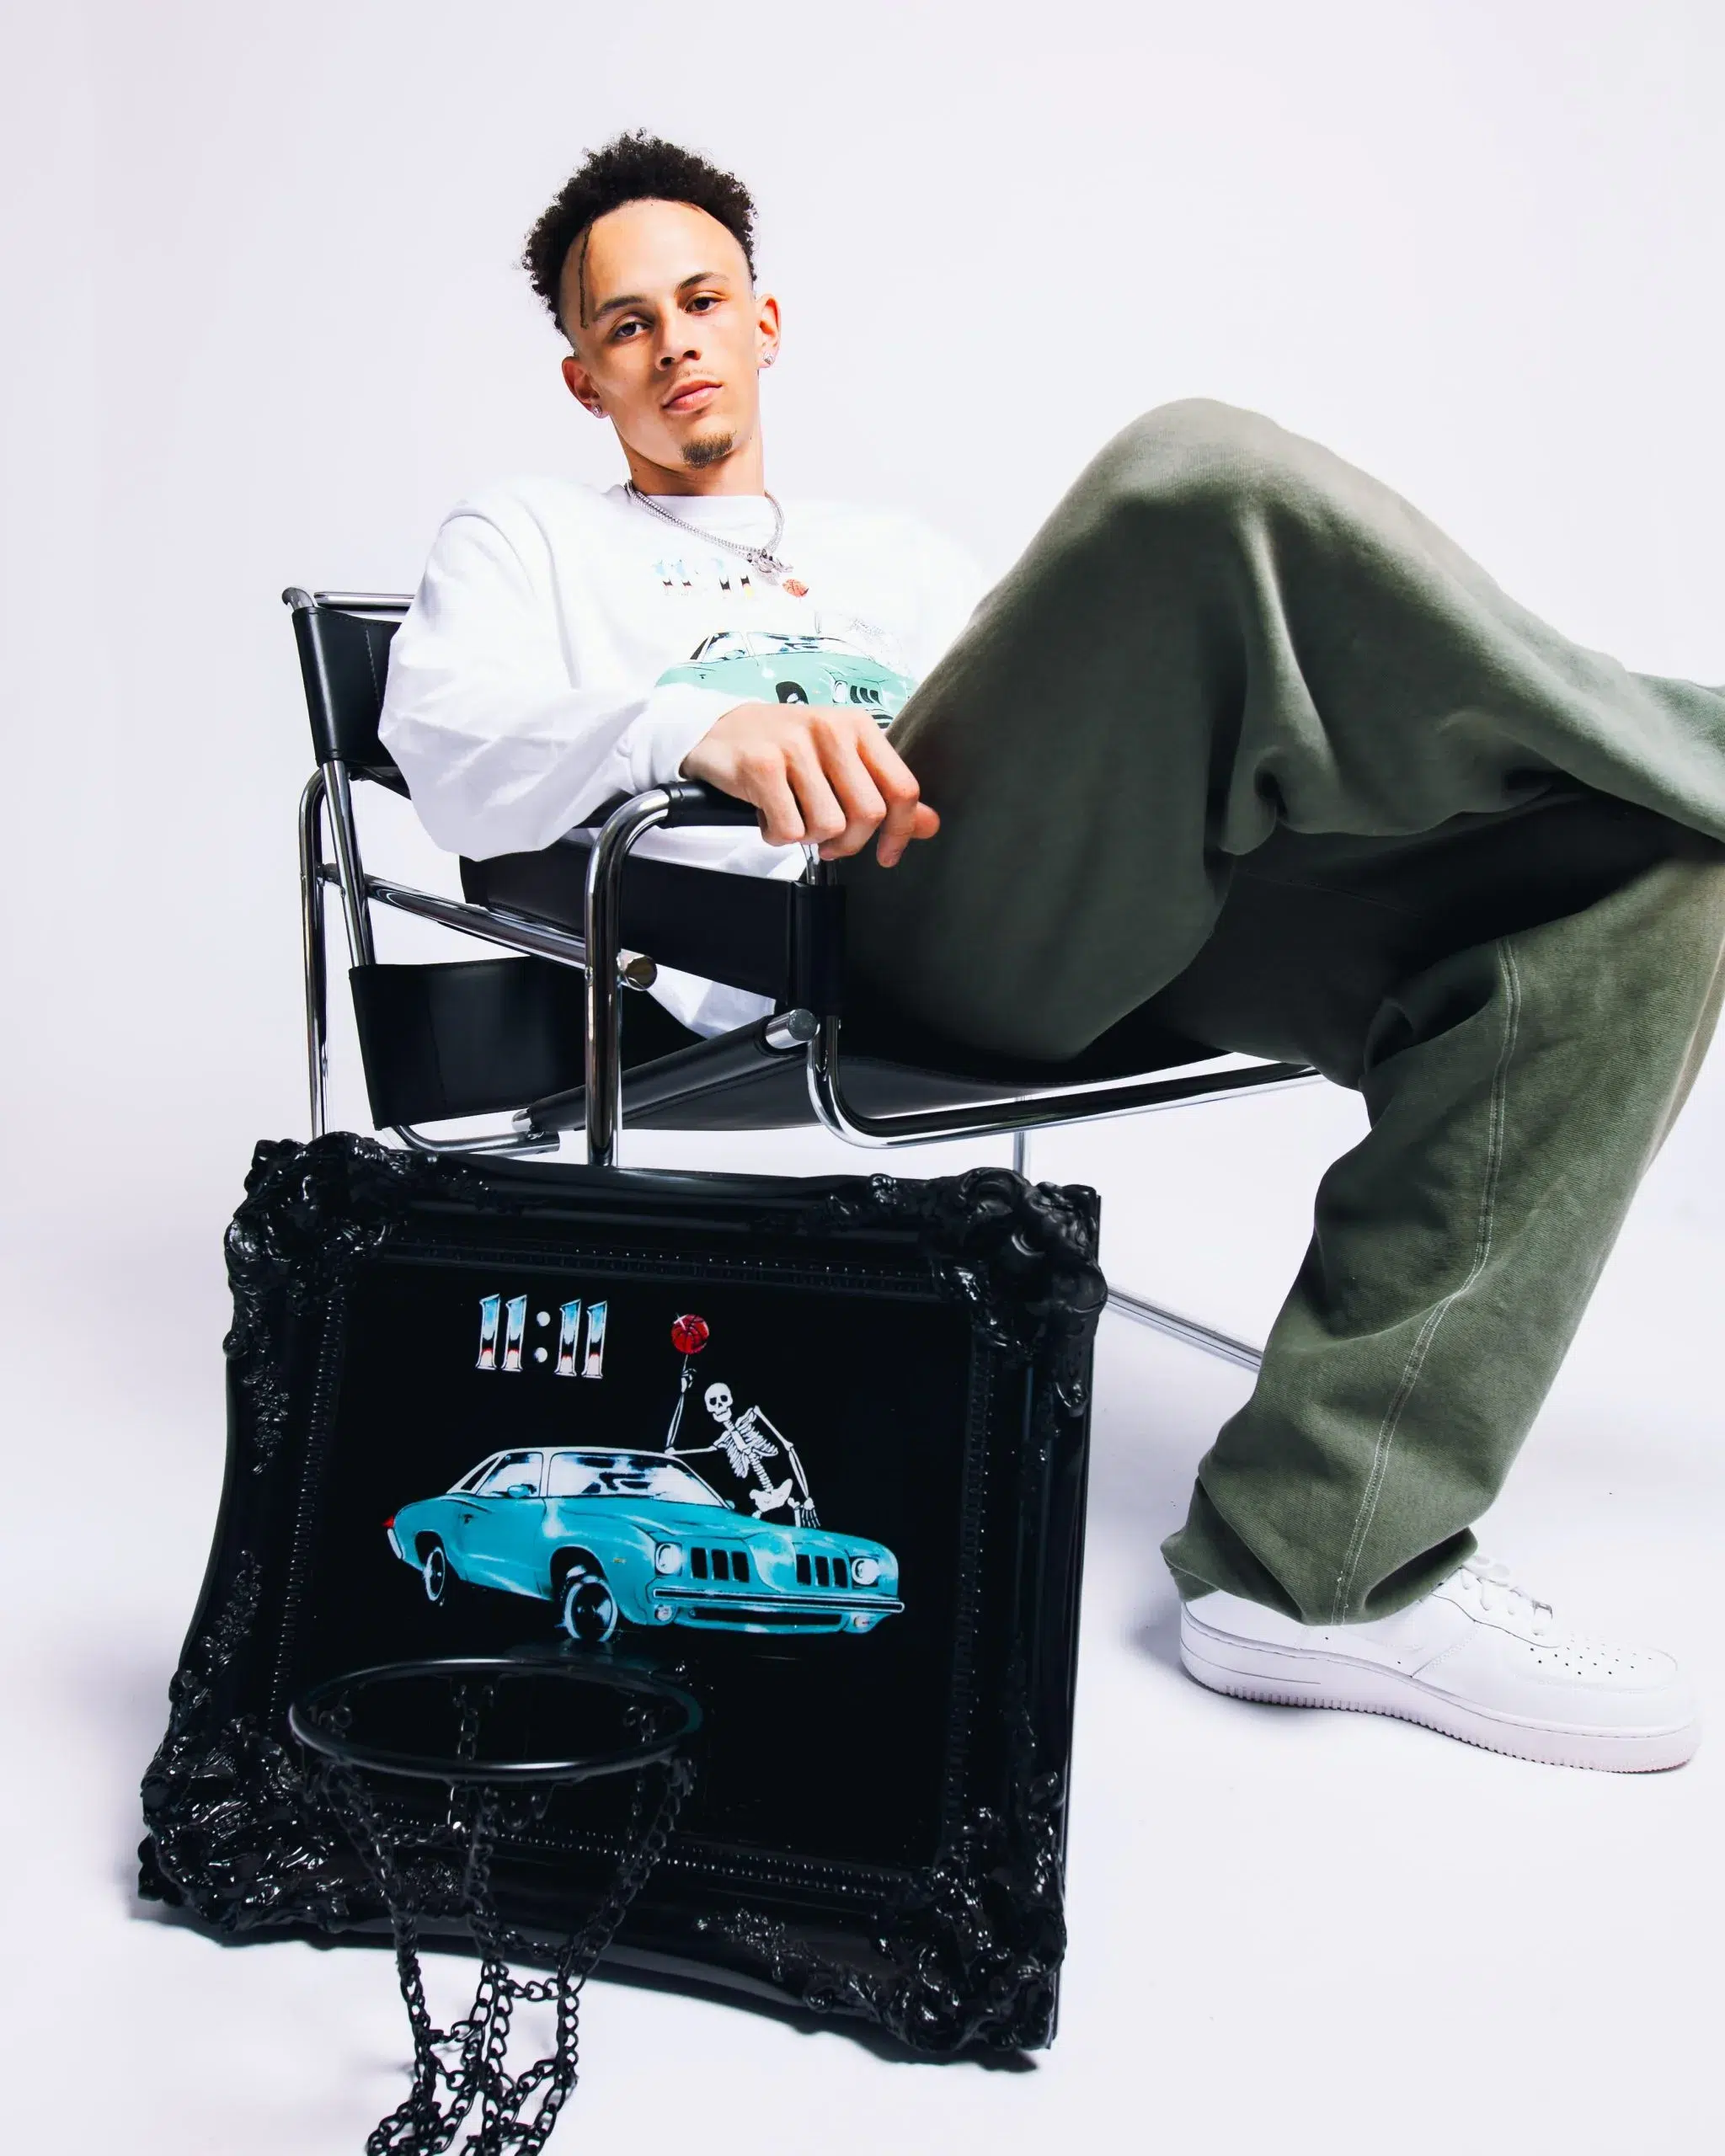 A man sitting on a chair with a picture of a car.